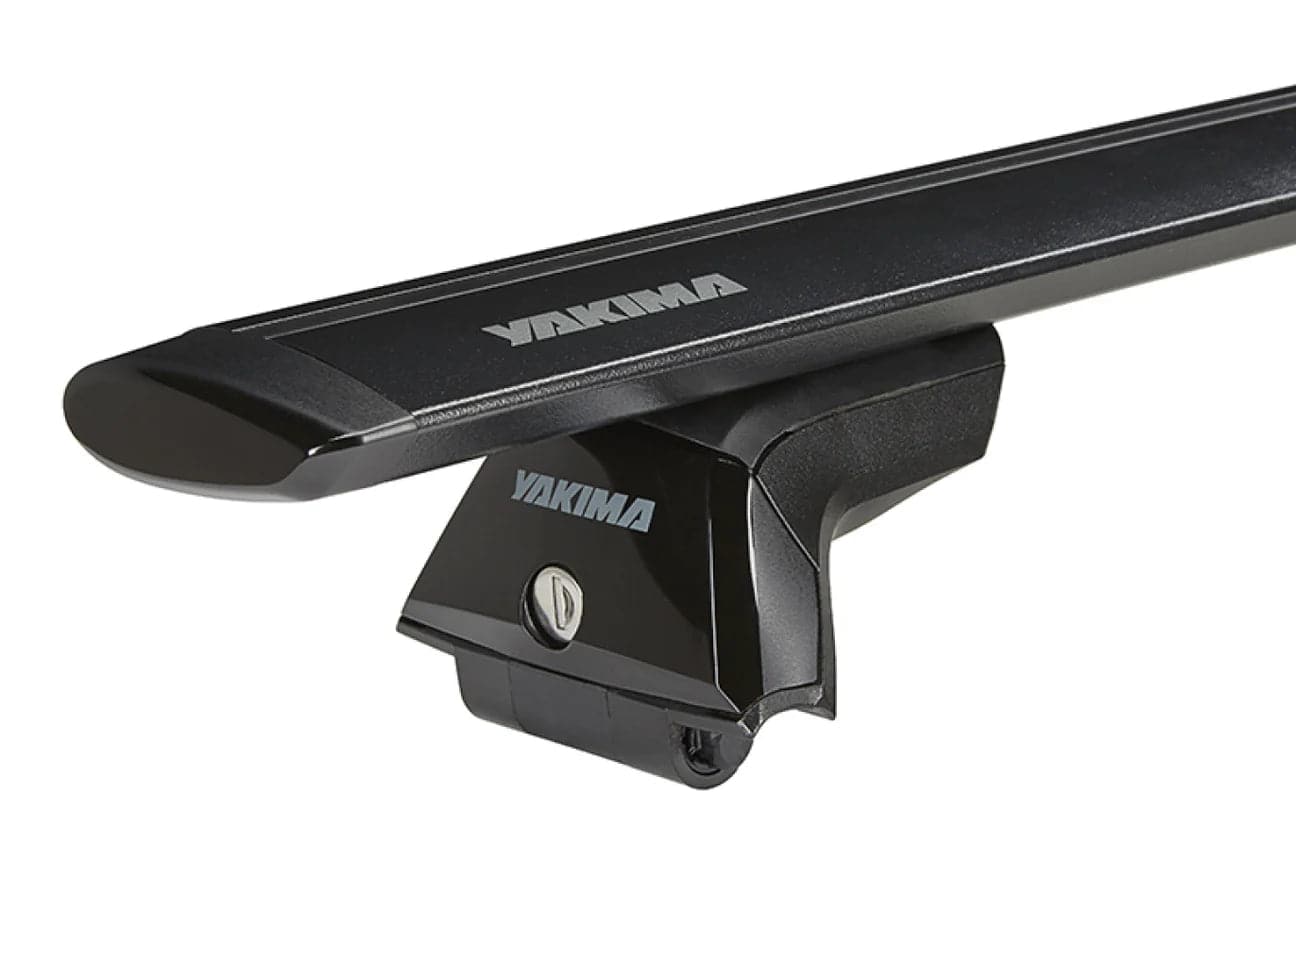 Featuring the Skyline Tower roof rack manufactured by Yakima shown here from a fifth angle.